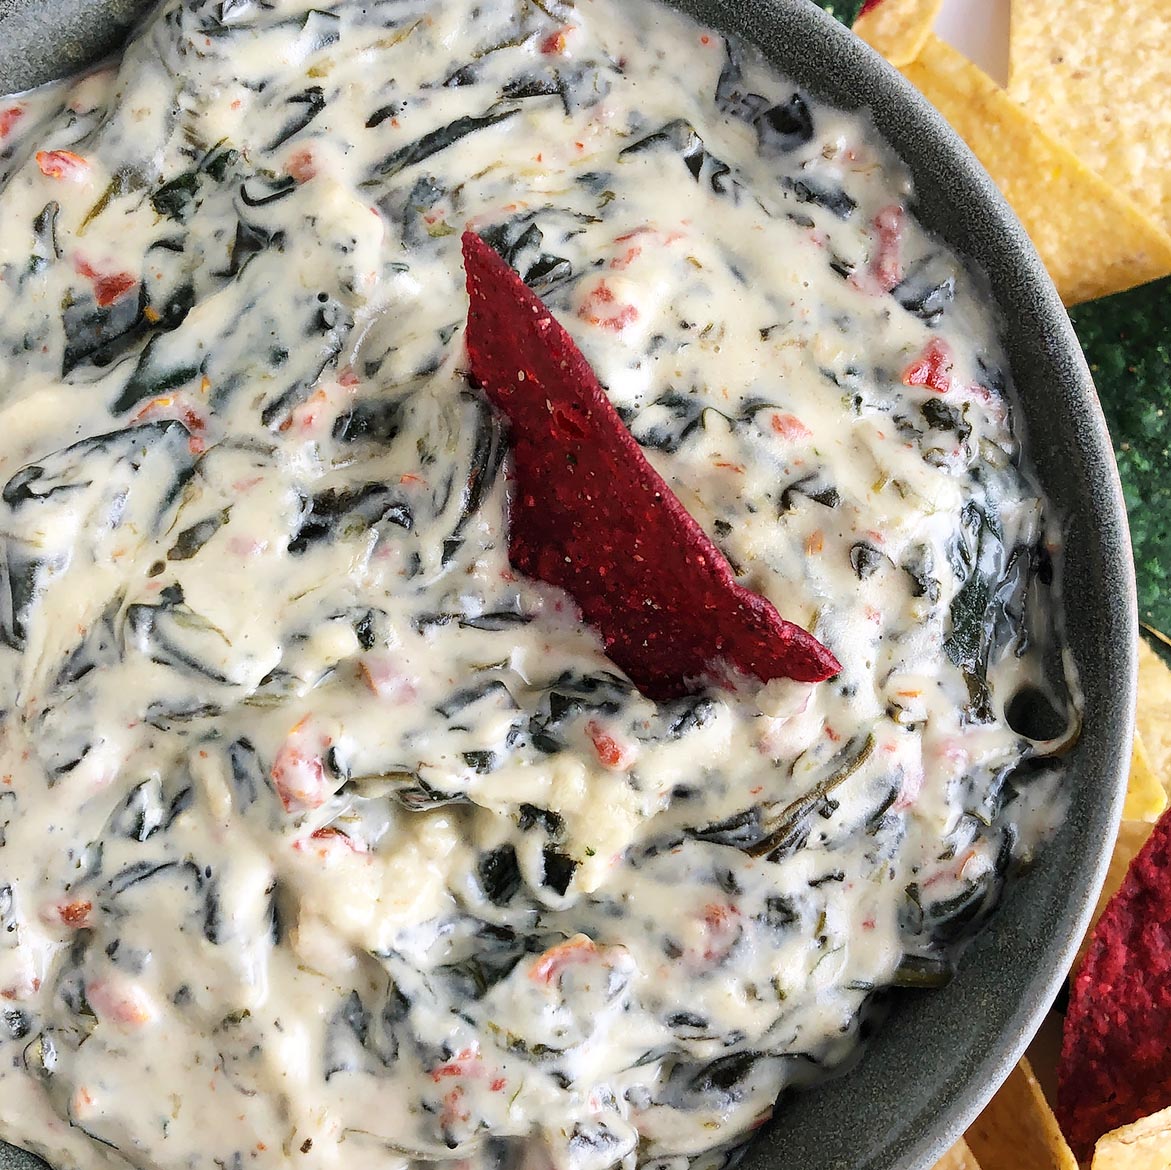 Top-down, close up view of Hot Spinach Dip with a red corn chip dipped in it